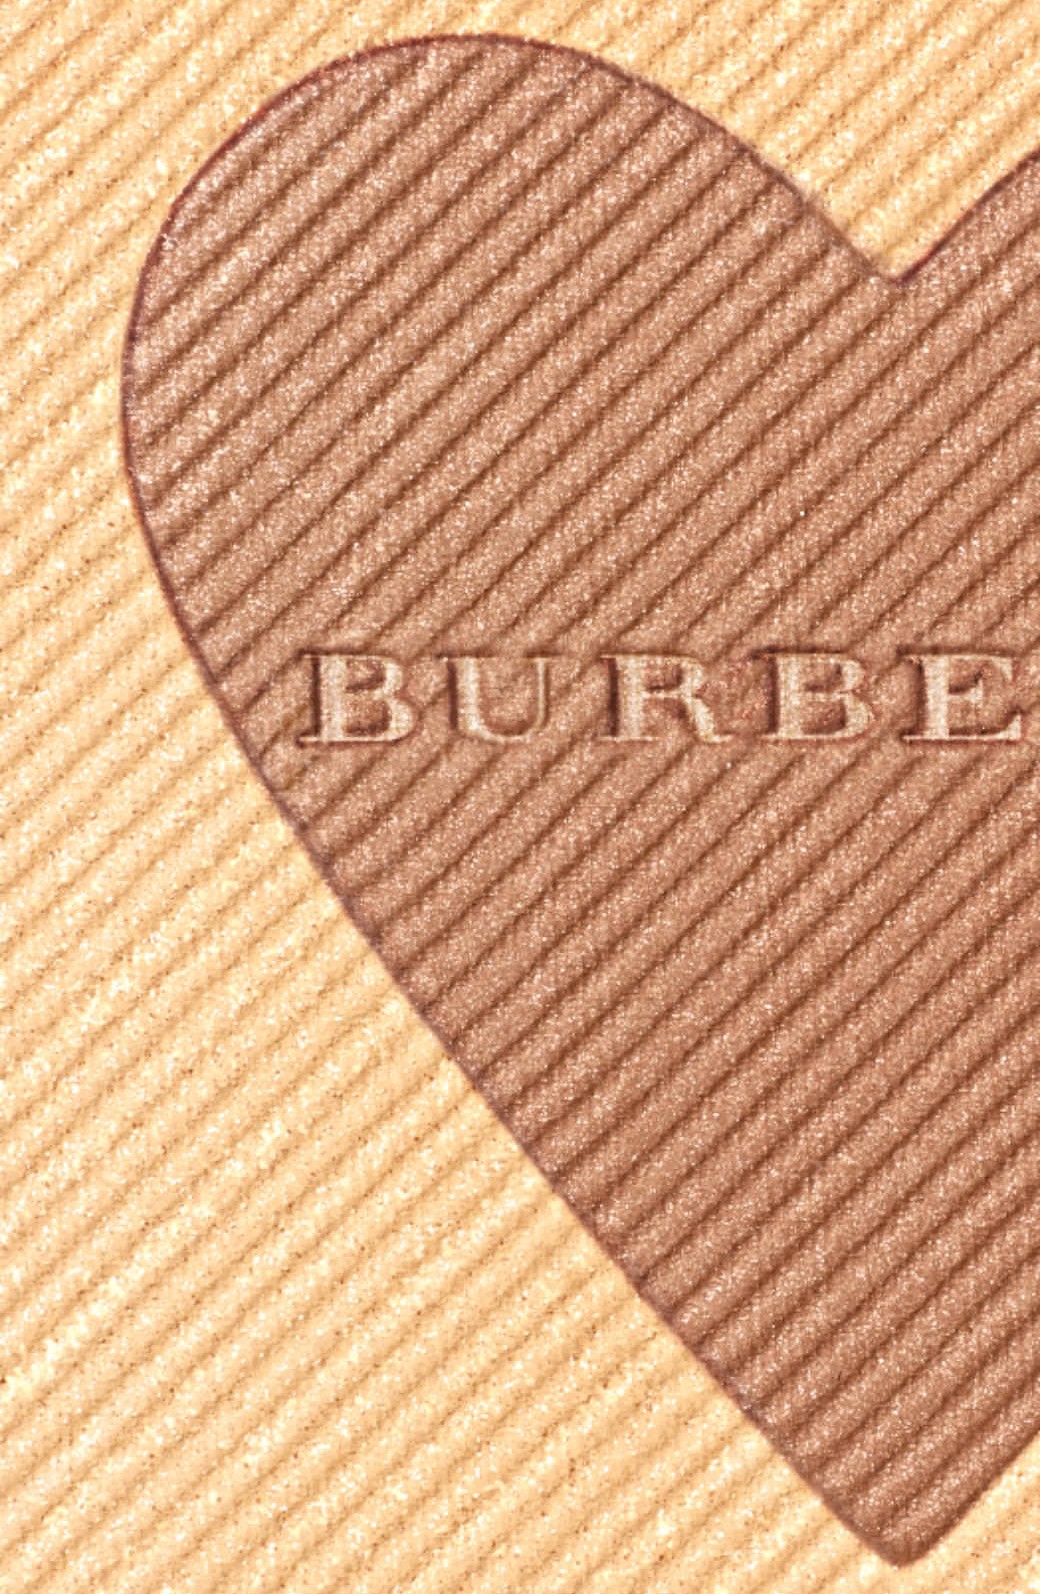 Burberry London with Love Palette